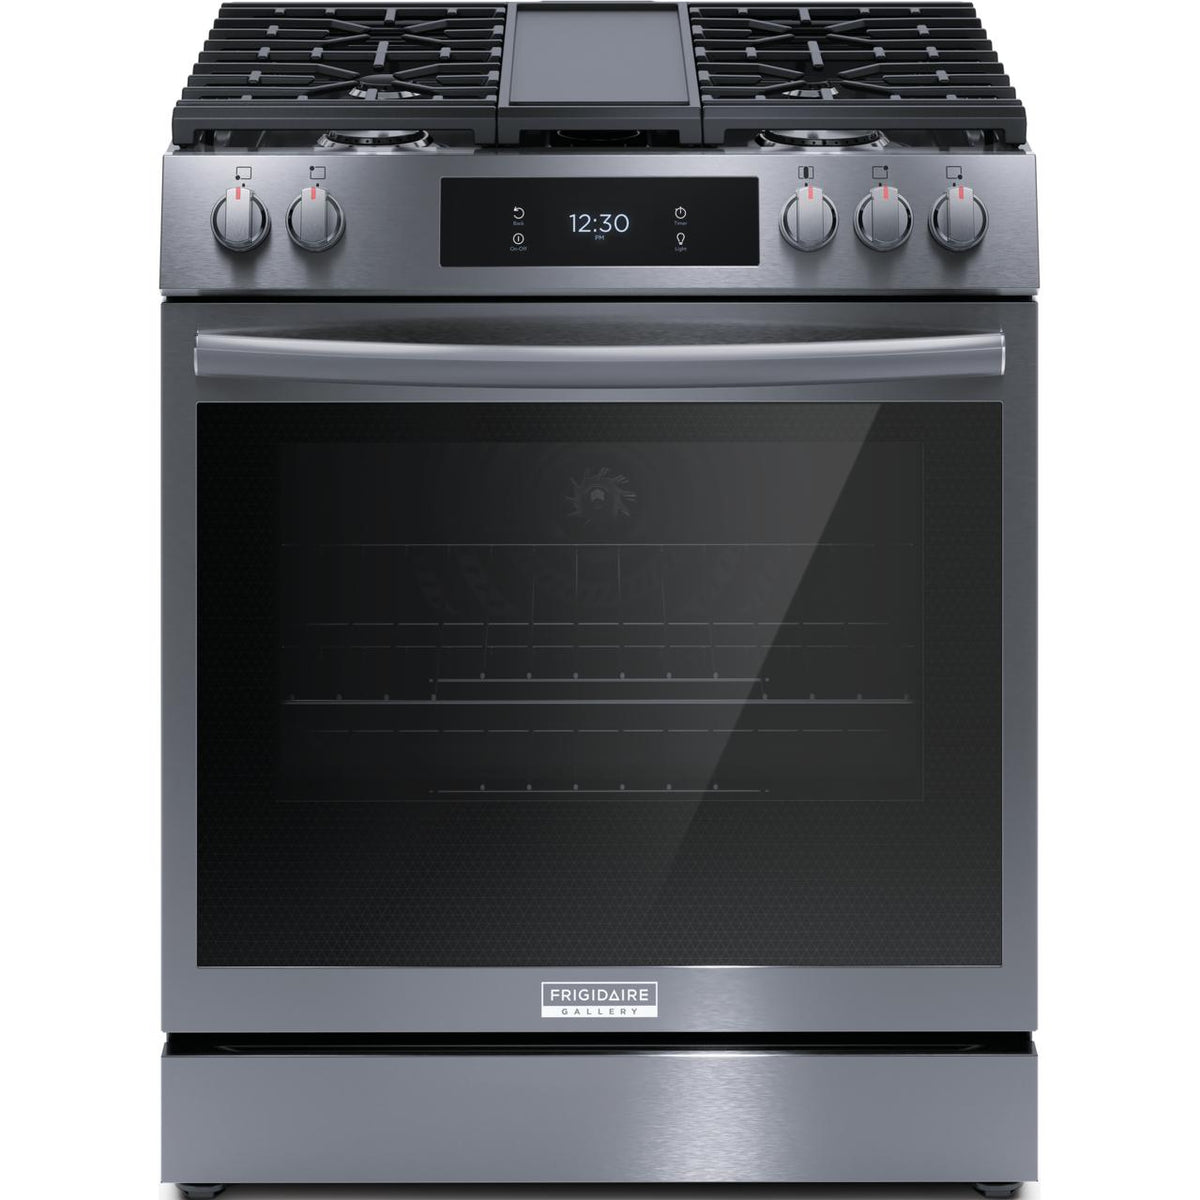 30-inch Freestanding Gas Range with Convection Technology GCFG3060BD IMAGE 1